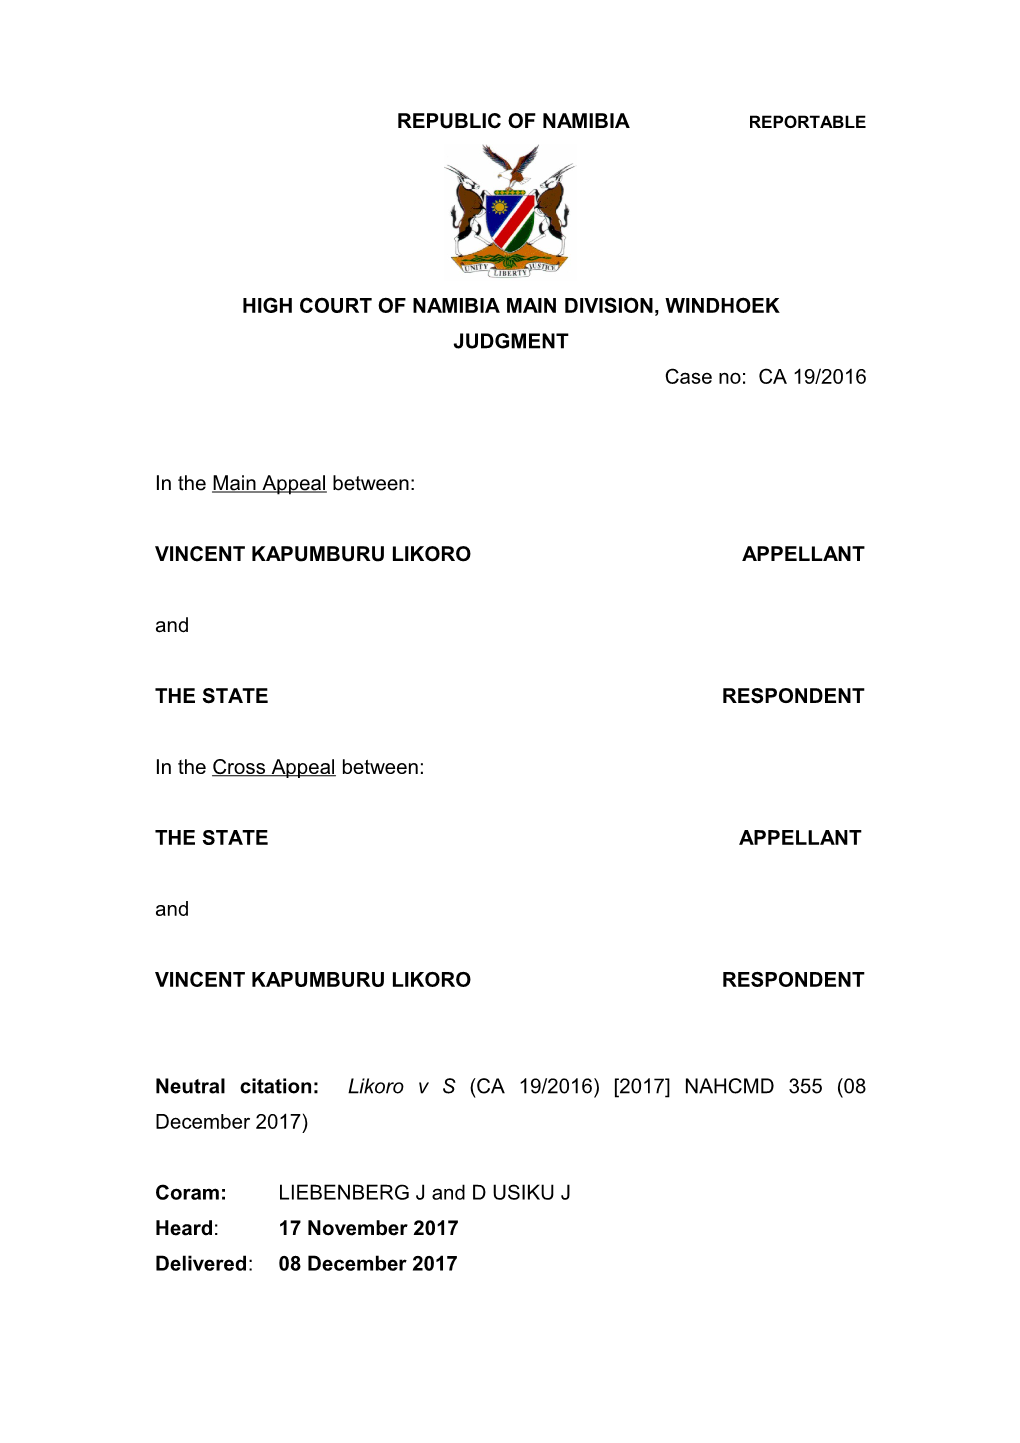 High Court of Namibia Main Division, Windhoek s11